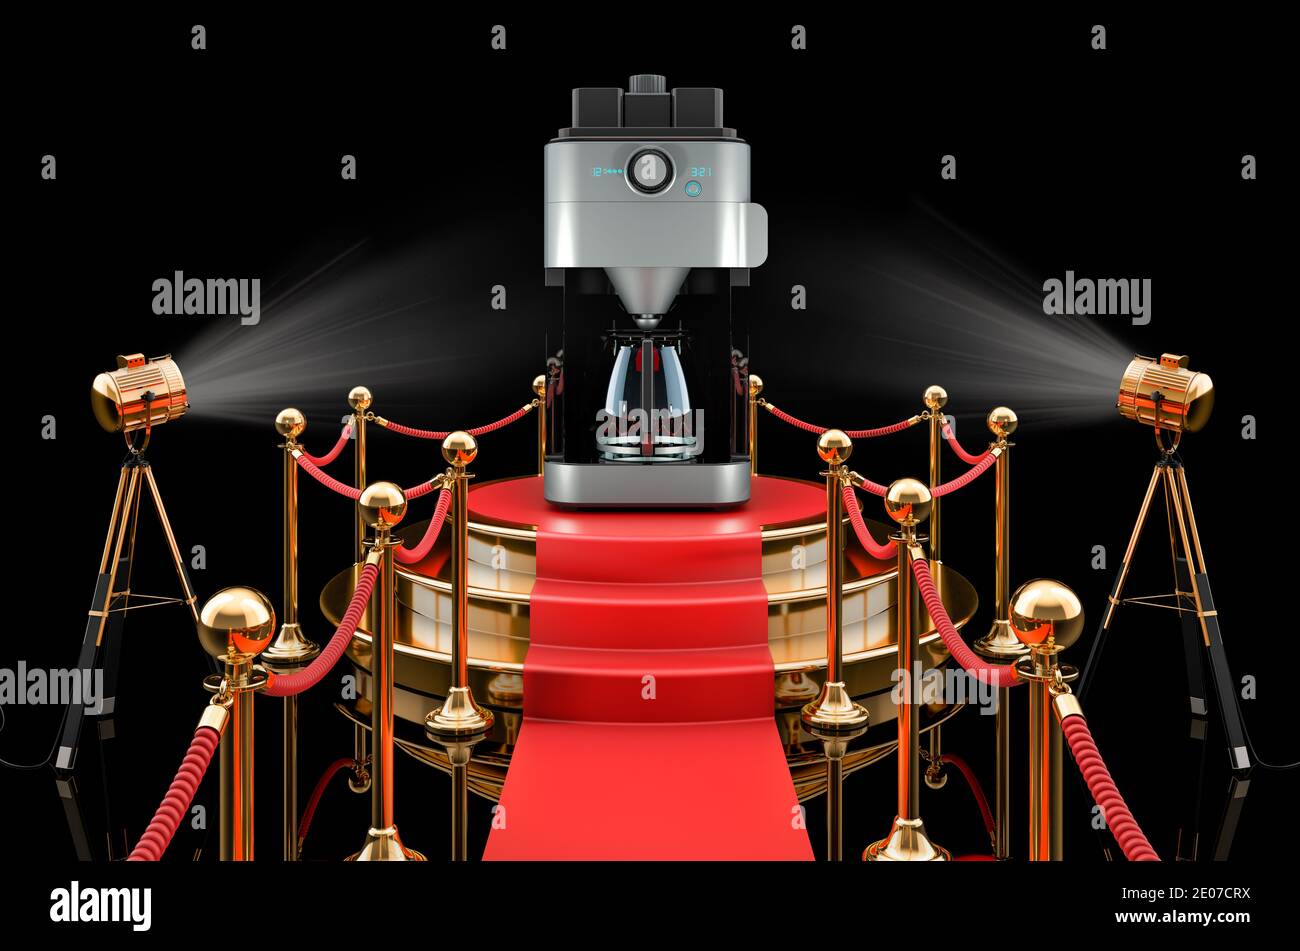 Podium with coffeemaker. 3D rendering isolated on black background Stock Photo